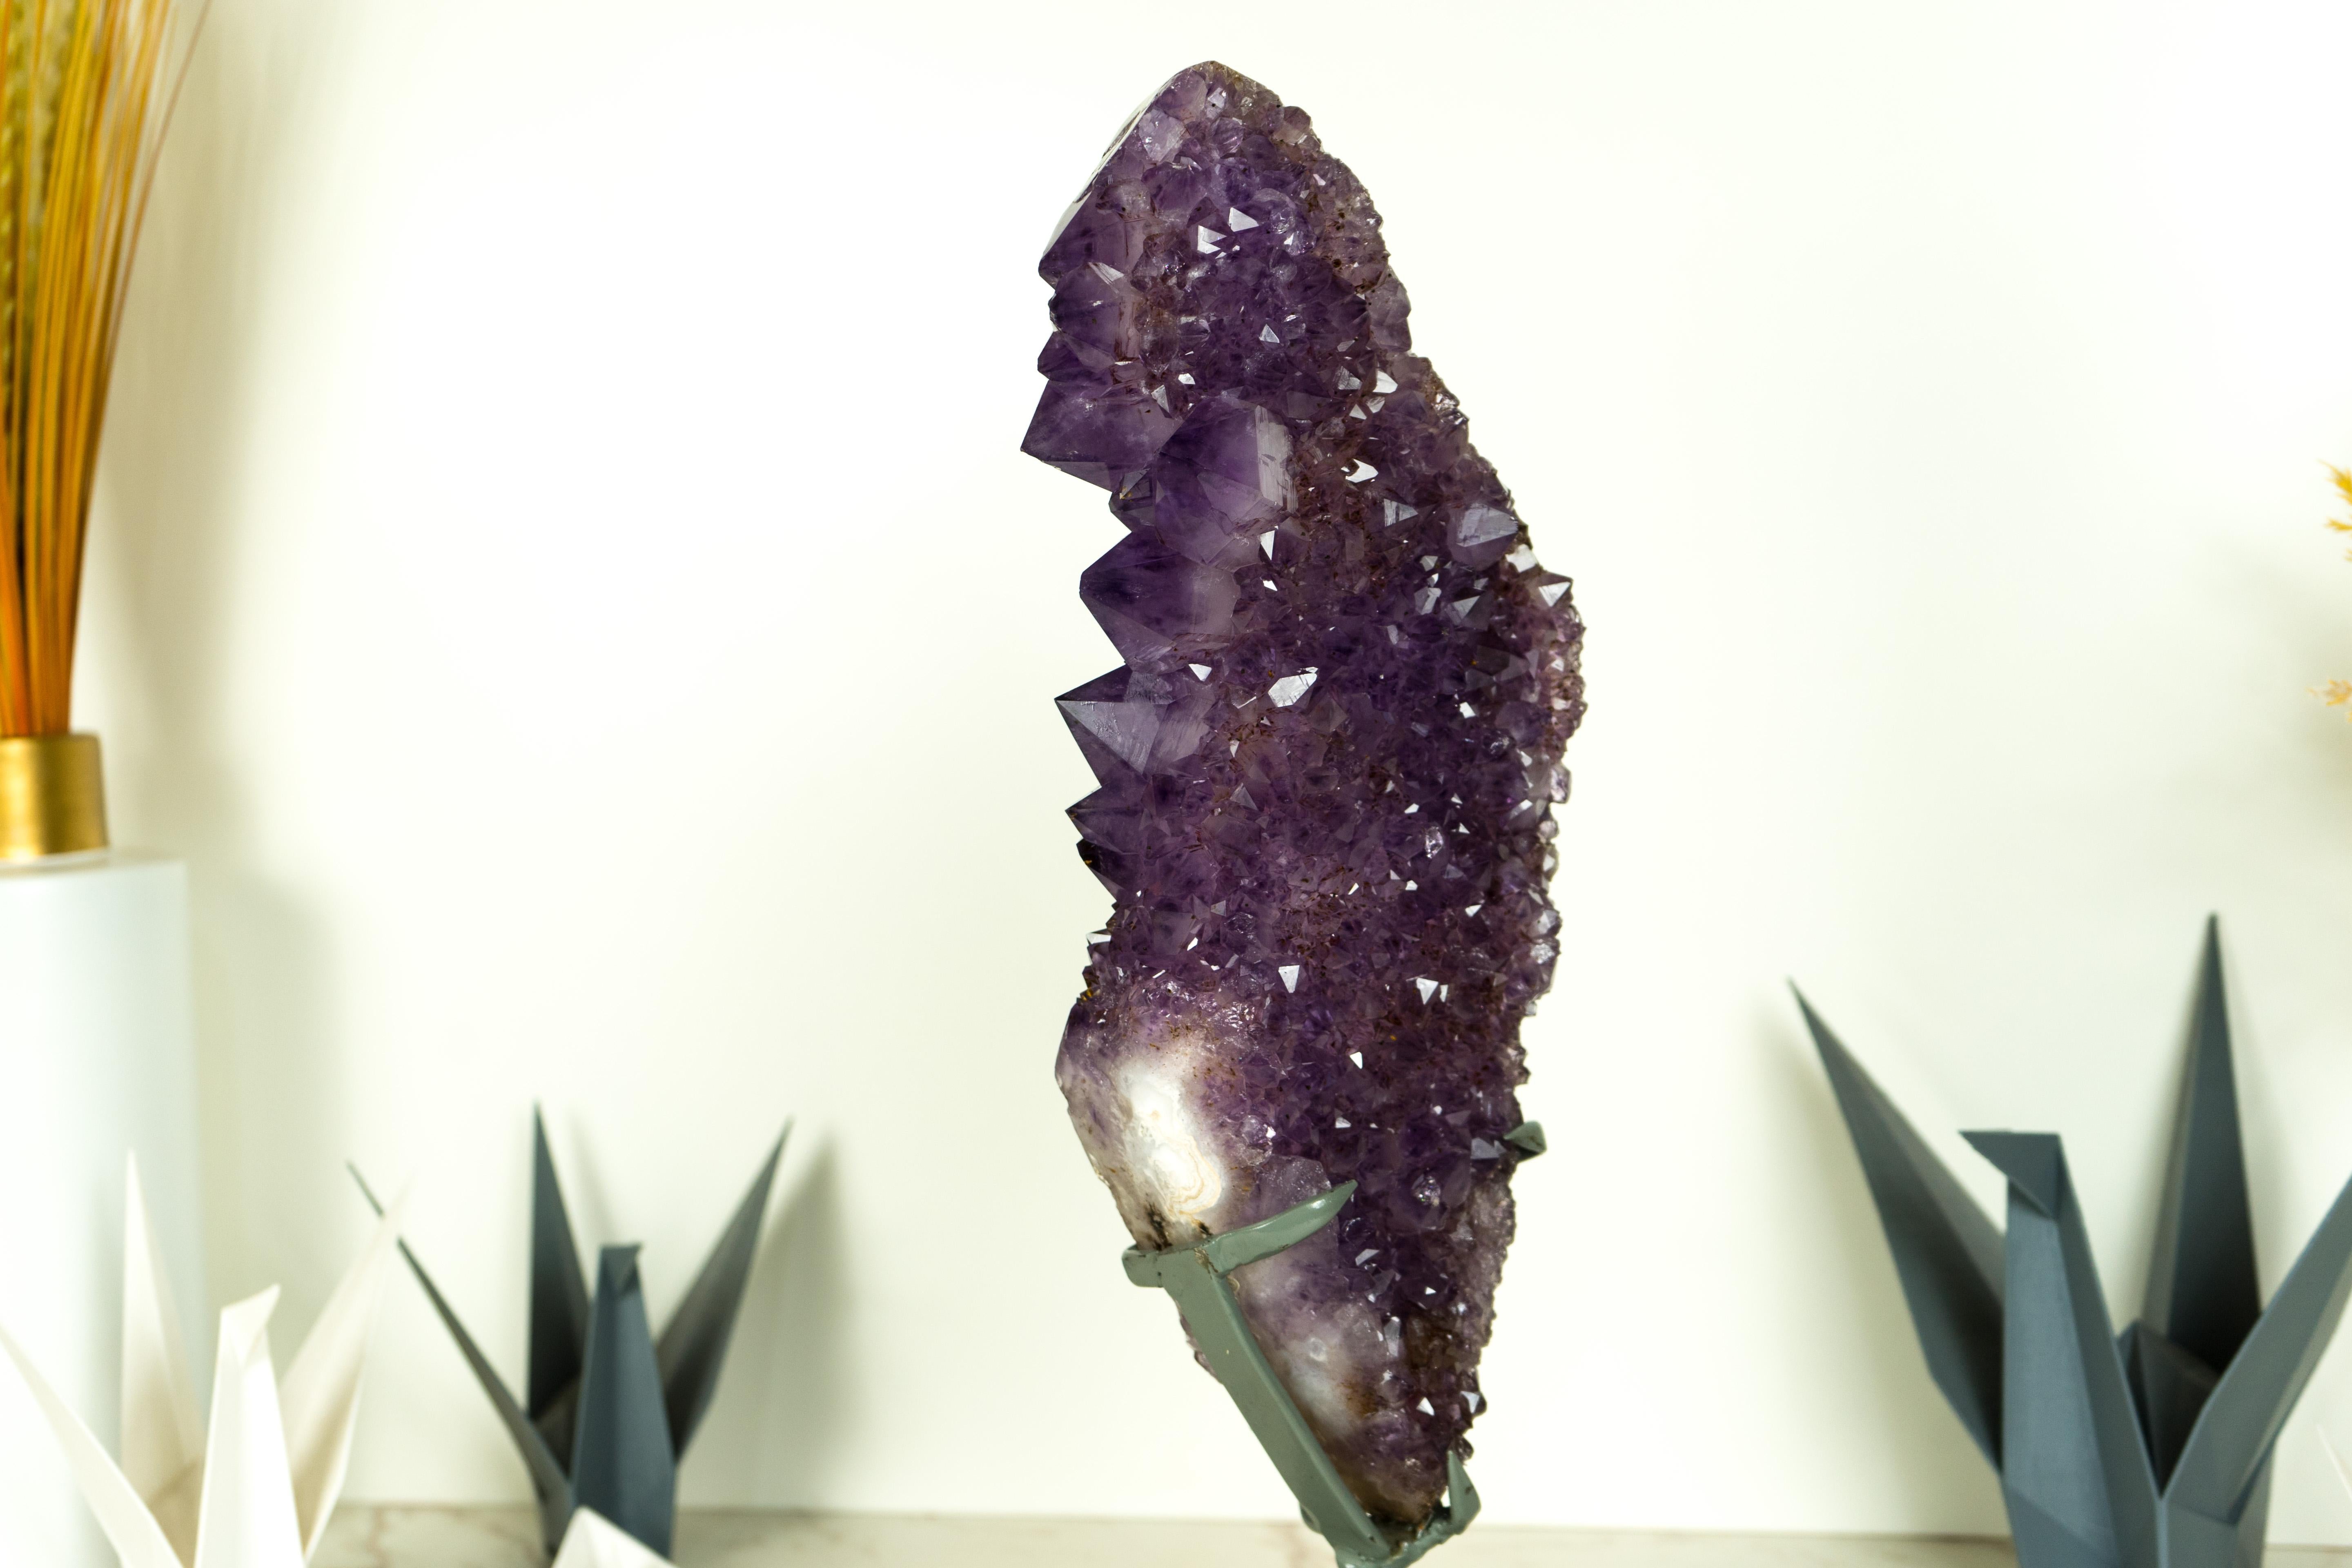 A beautiful Amethyst Geode Cluster that brings beautiful Aesthetics that is formed by large, uncommonly formed Amethyst Druzy surrounded by smaller sparkly druzy, this cluster brings perfectly formed Amethyst Druzy on top of an Agate matrix. A